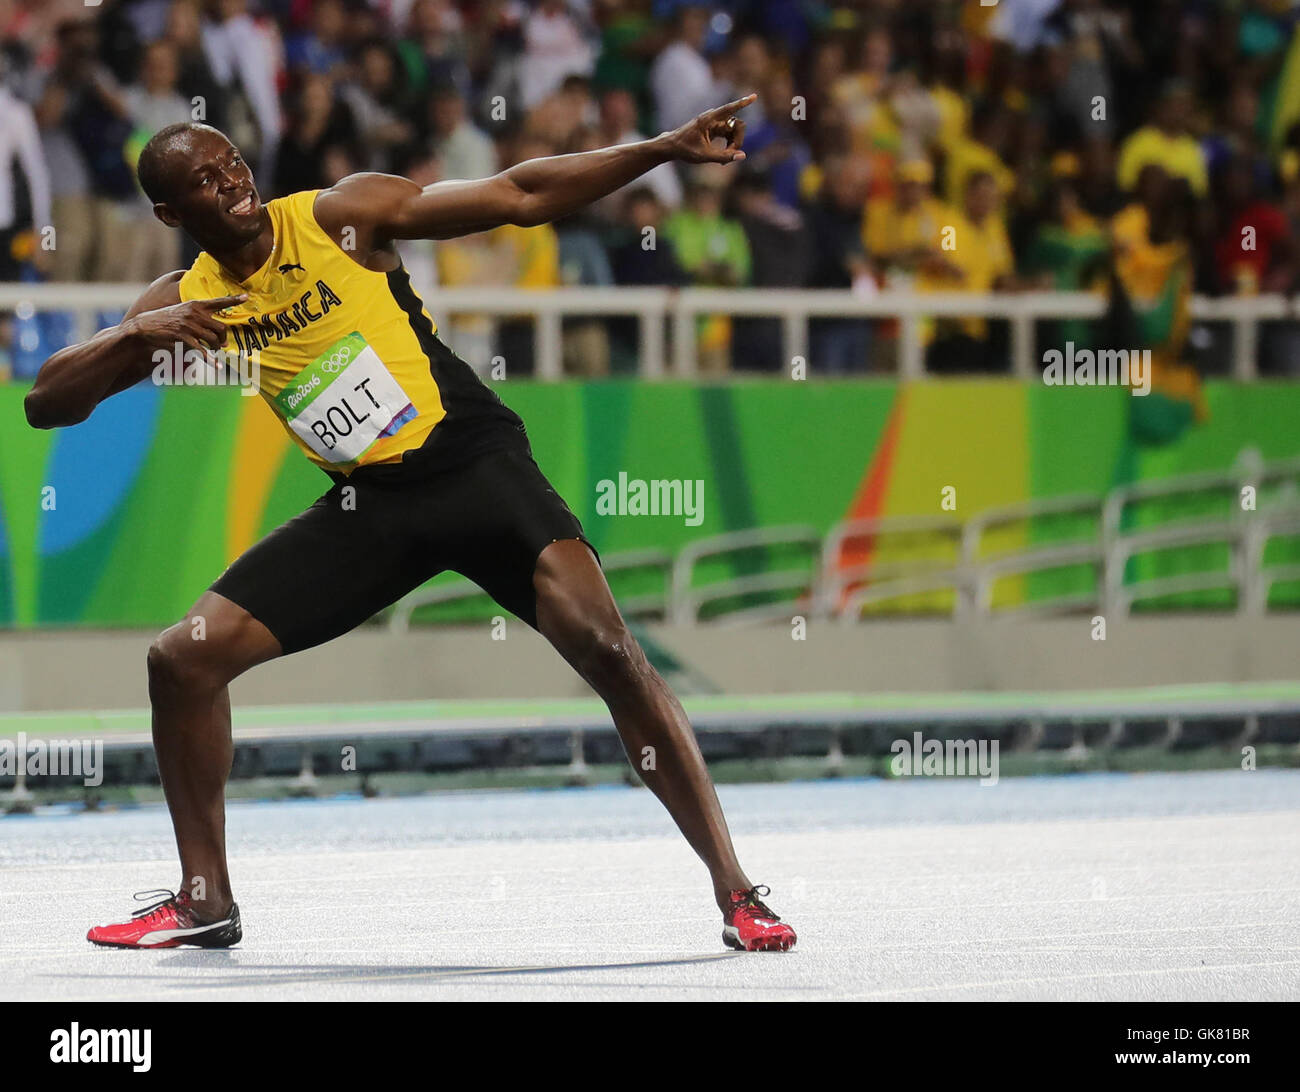 Rio de Janeiro, Brazil. 18th Aug, 2016. Usain Bolt of Jamaica reacts after winning the Men's 200m Final of the Olympic Games 2016 Athletic, Track and Field events at Olympic Stadium during the Rio 2016 Olympic Games in Rio de Janeiro, Brazil, 18 August 2016. Photo: Michael Kappeler/dpa/Alamy Live News Stock Photo